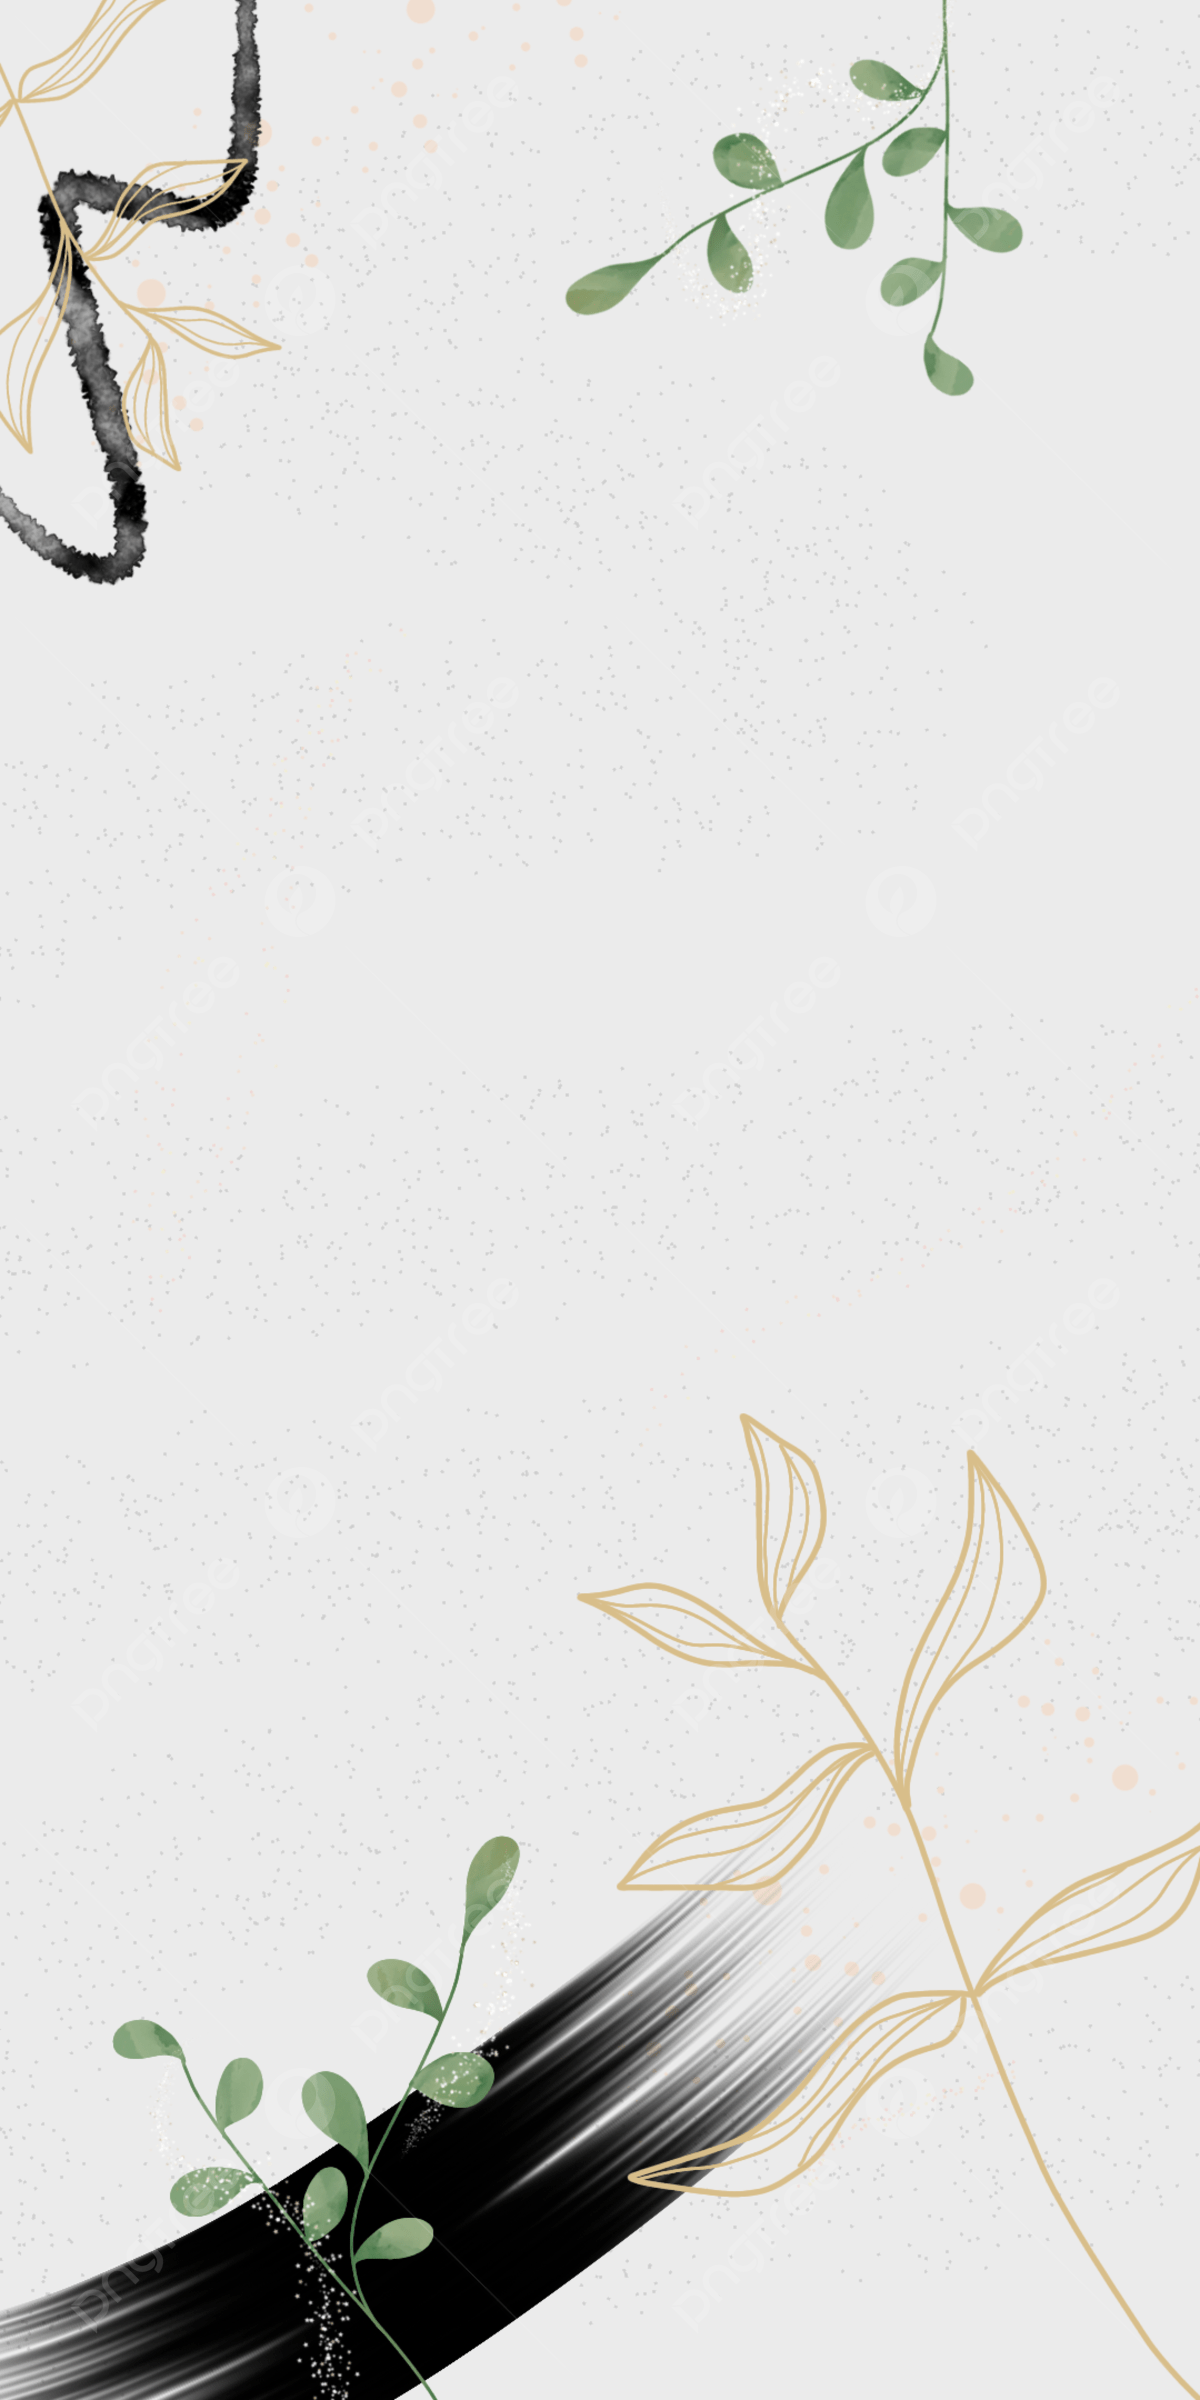 Aesthetic phone background with a black painted line, gold leaves, and abstract shapes. - Simple, art, YouTube, watercolor, medical